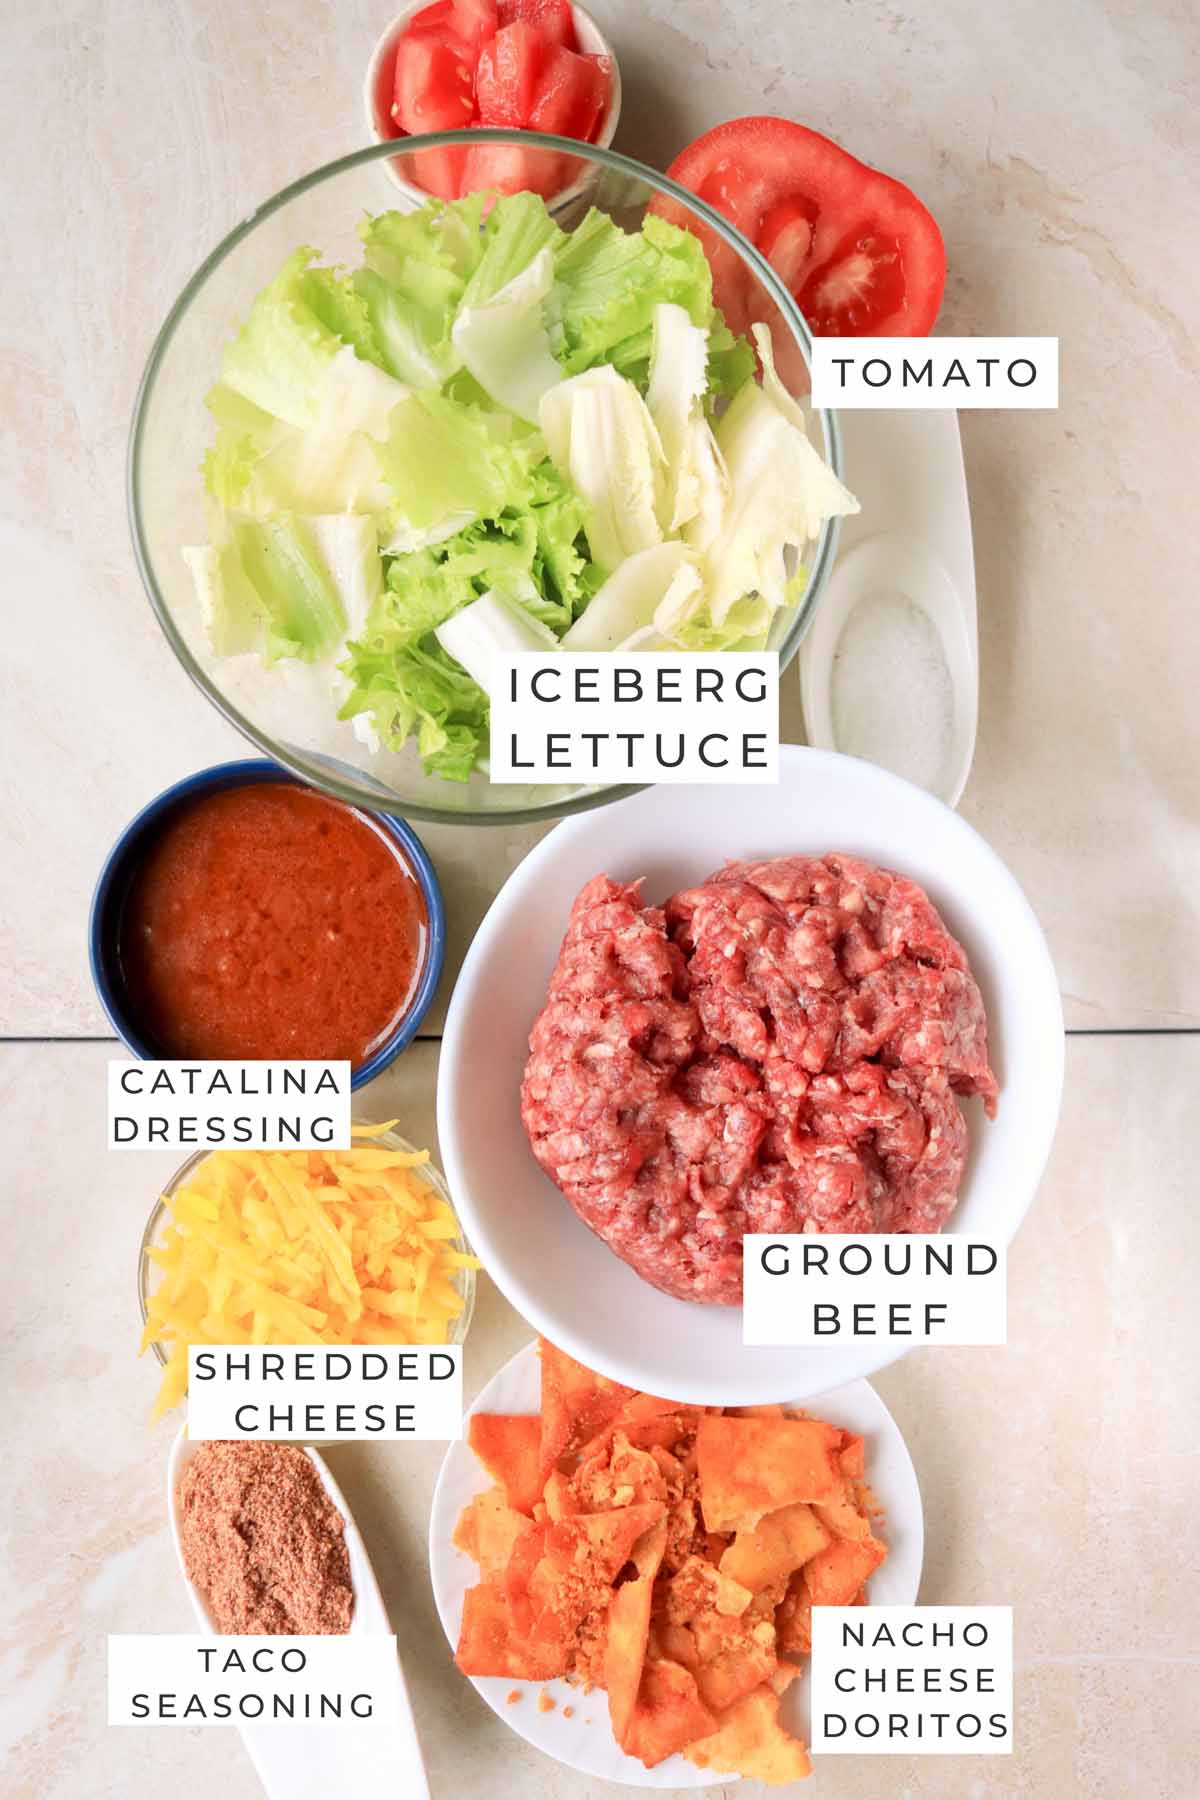 Labeled ingredients for the taco salad.